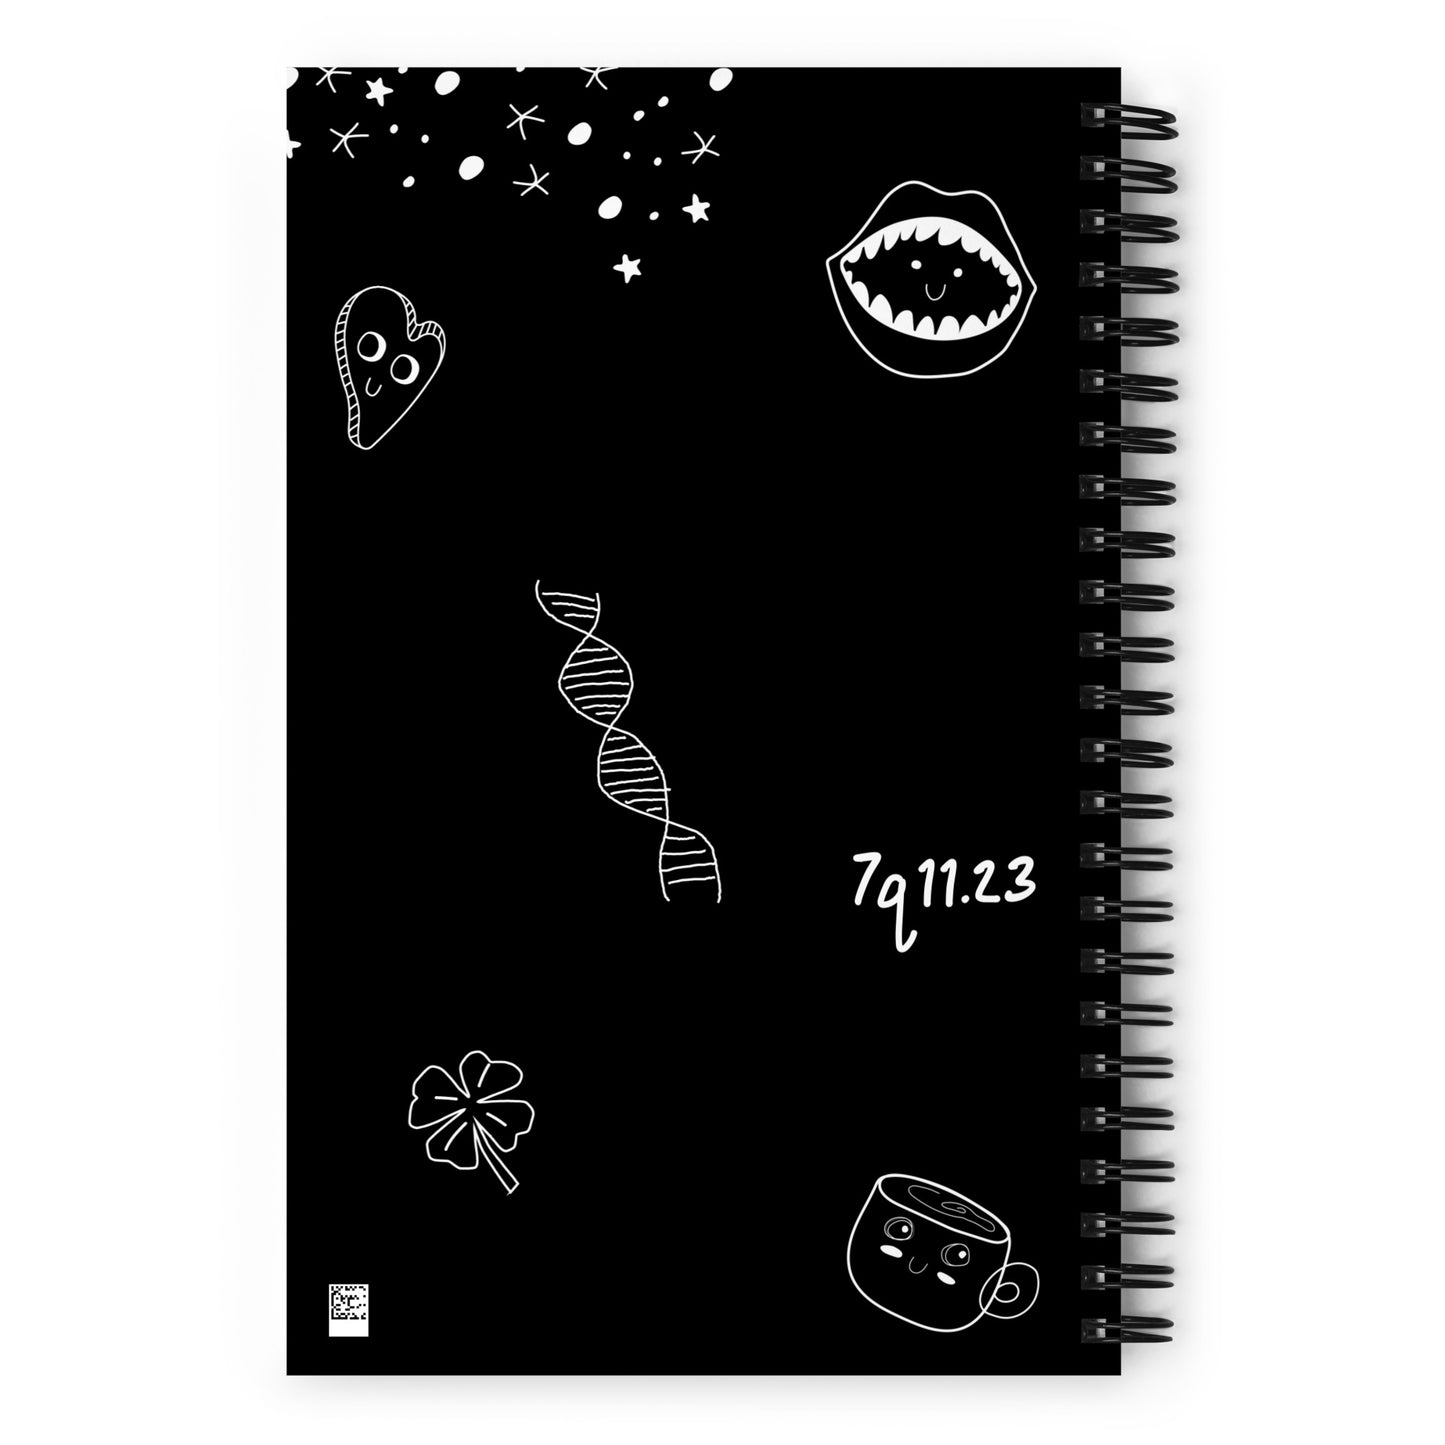 You Are Rare — Spiral Notebook.